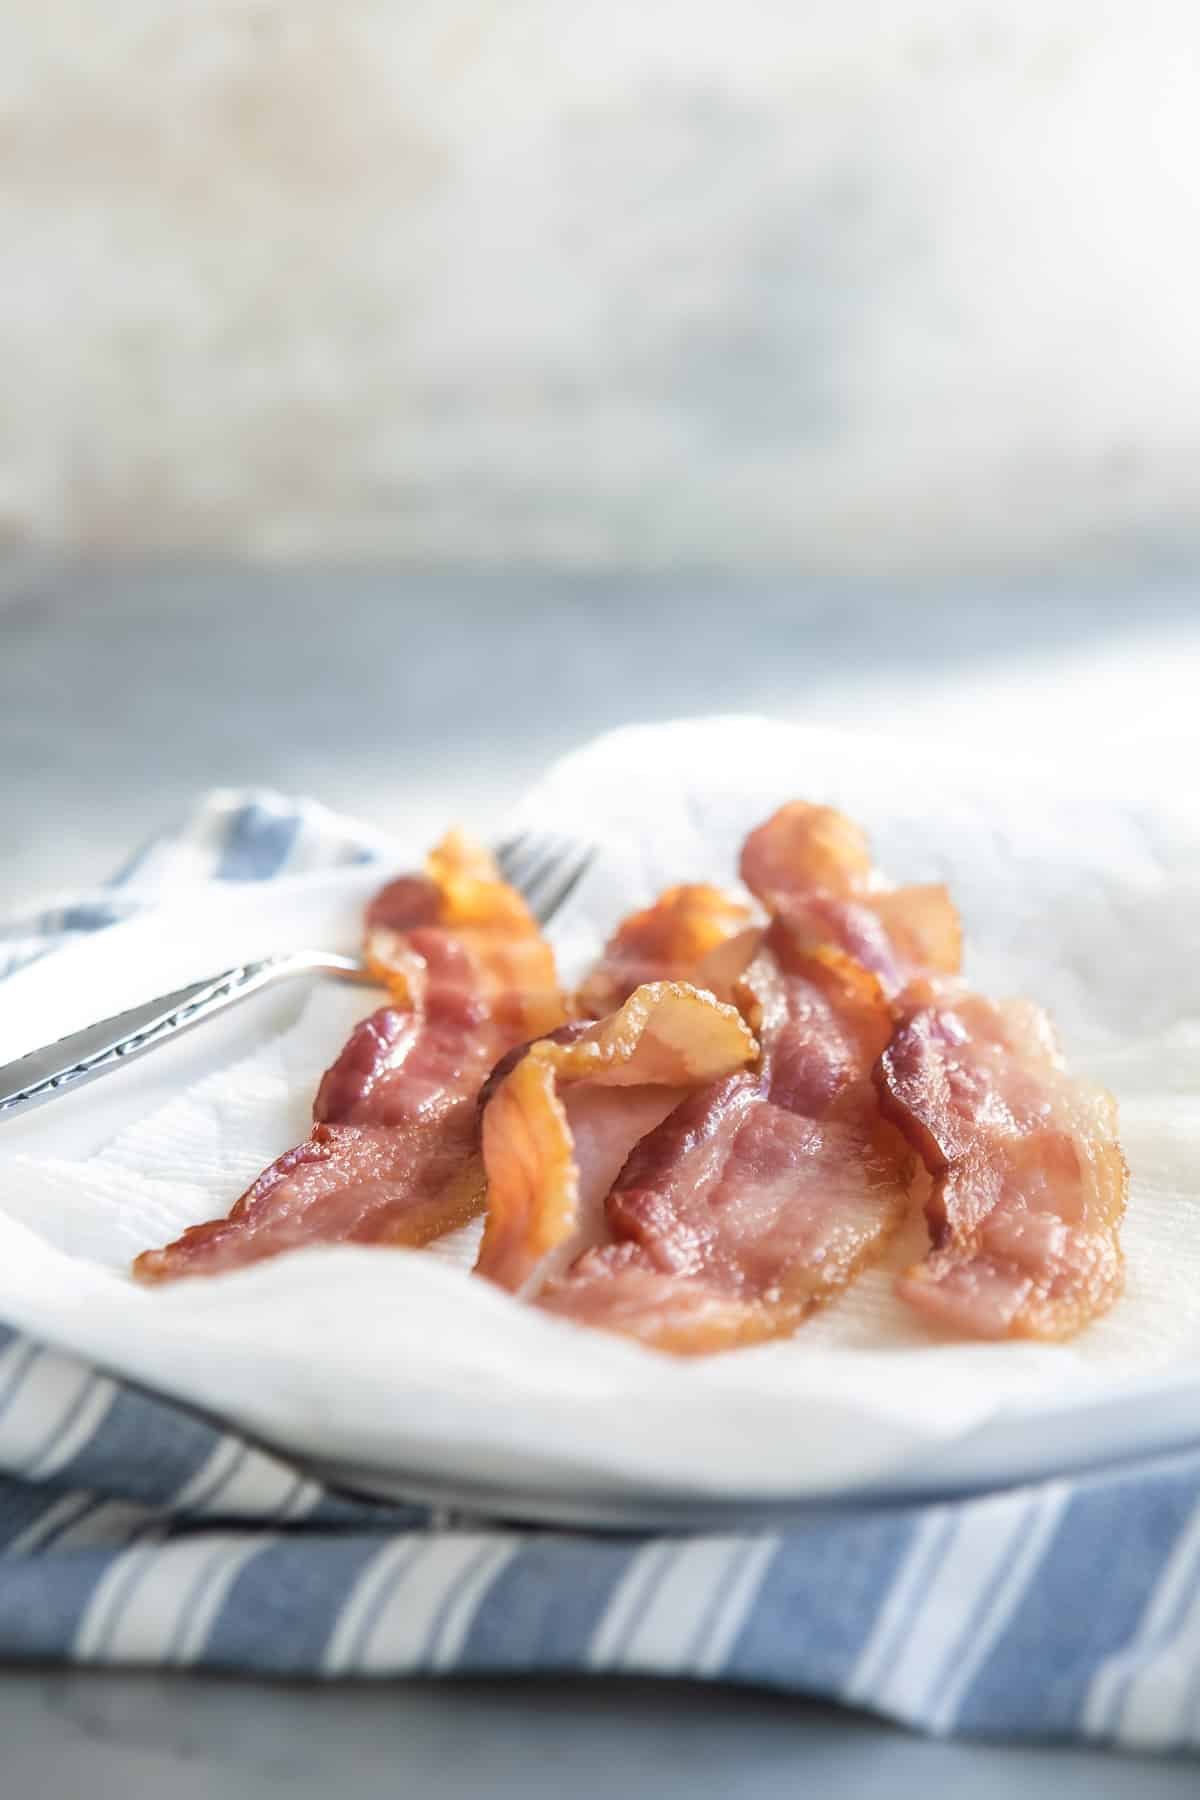 How to Cook Crispy Bacon, Oven Baked and Less Oil